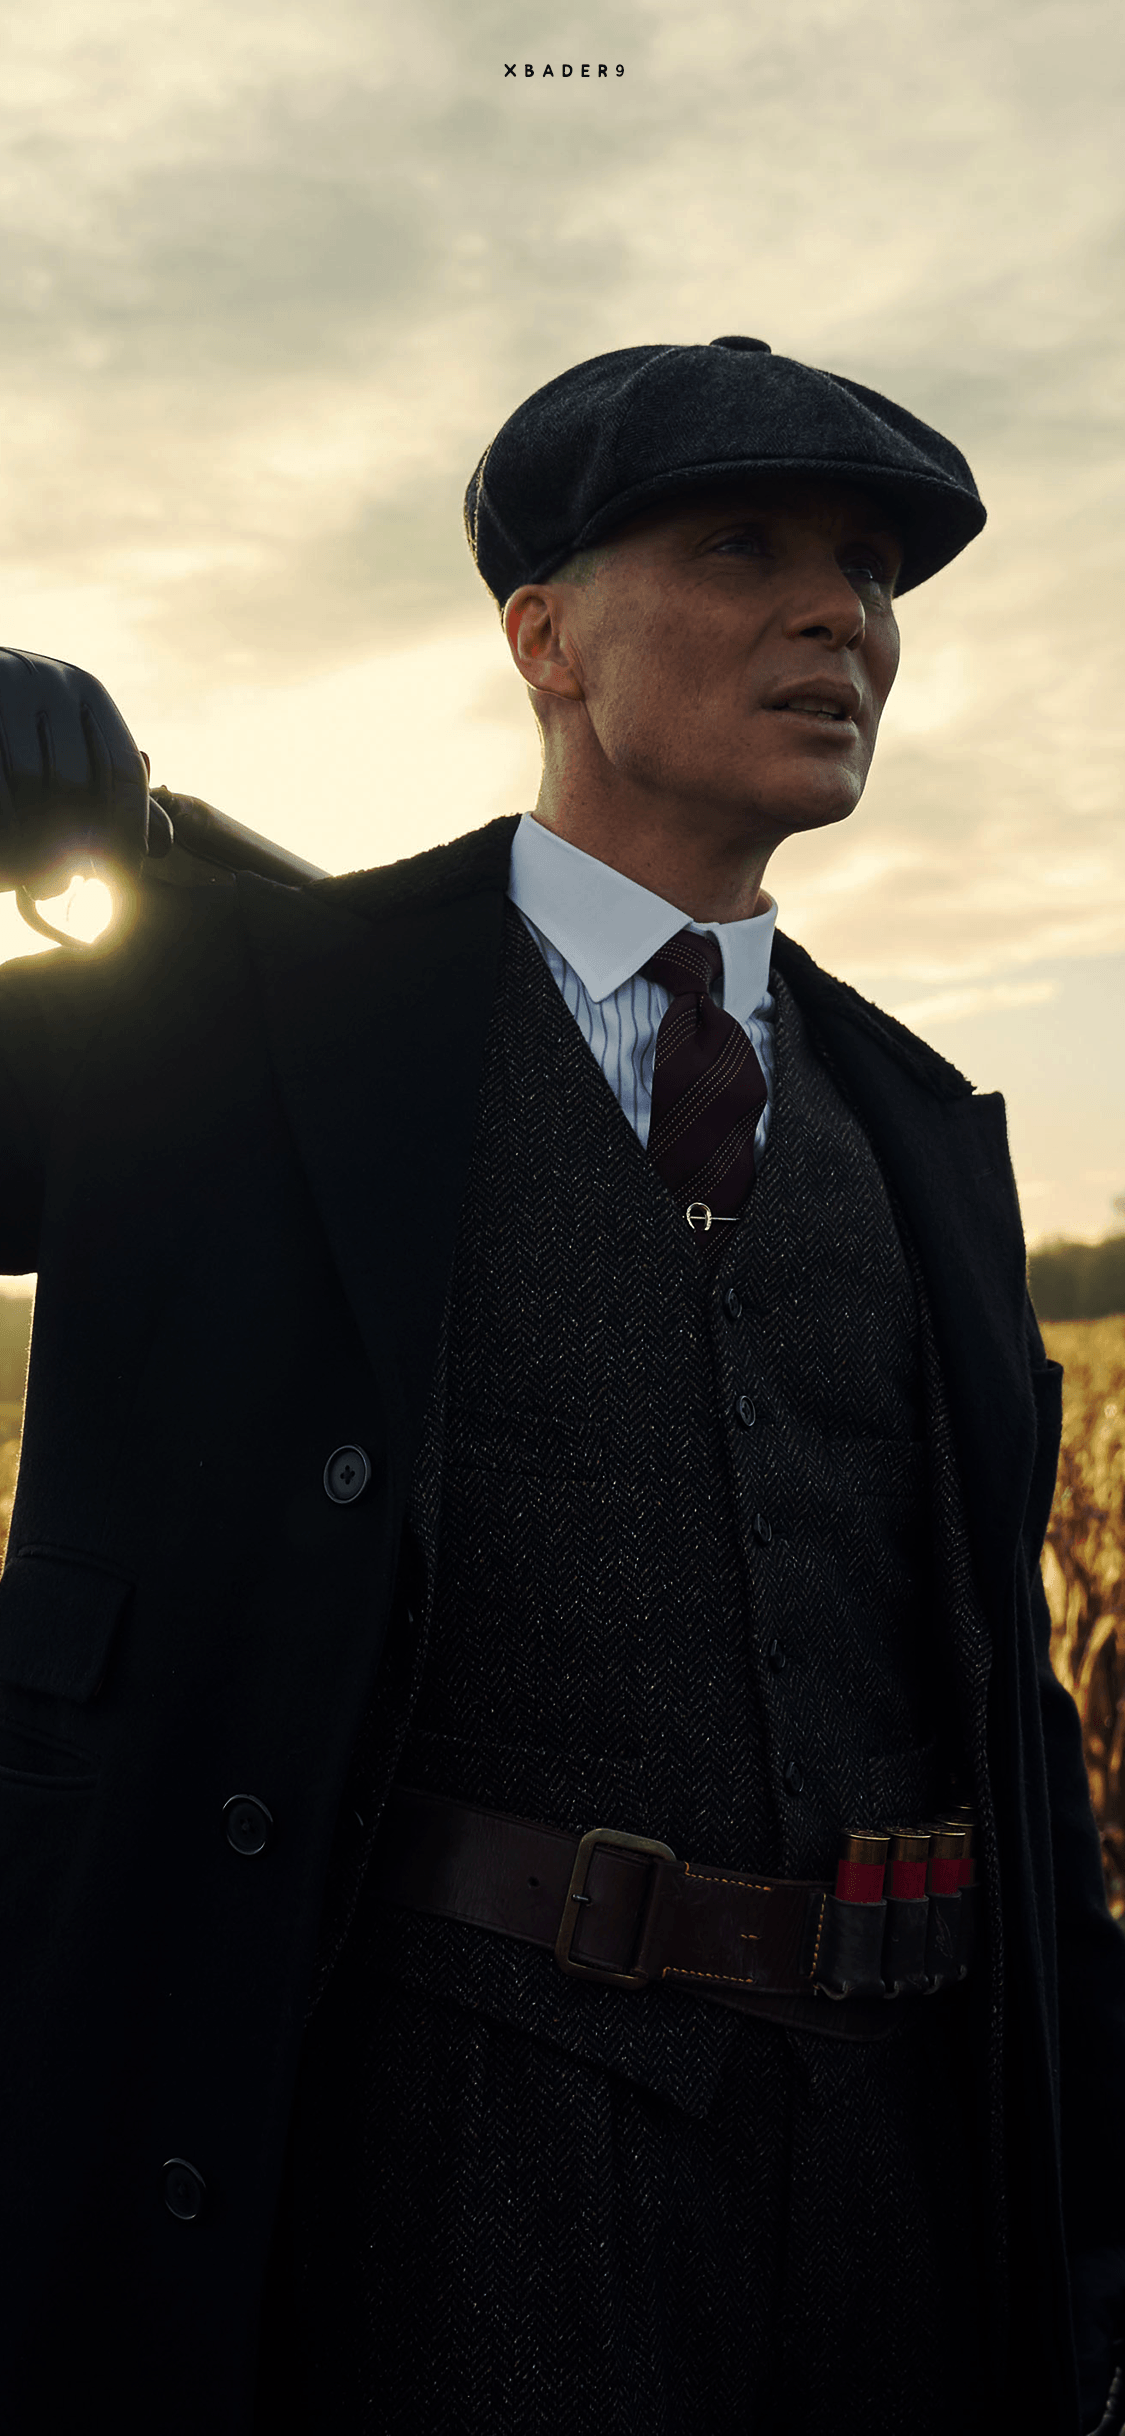 Wallpaper ID 324821  TV Show Peaky Blinders Phone Wallpaper Cillian  Murphy Thomas Shelby 1440x2560 free download